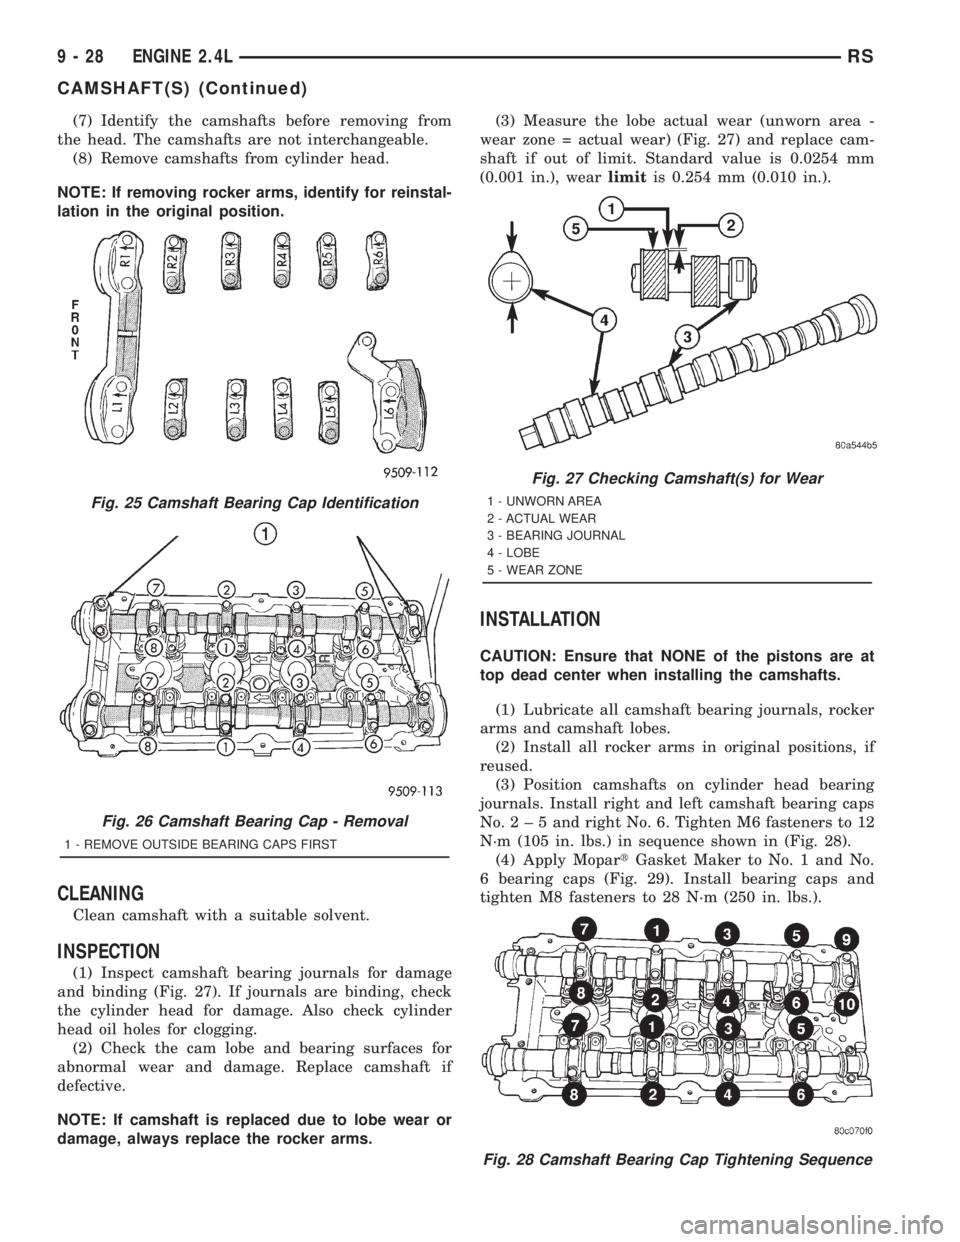 CHRYSLER VOYAGER 2001  Service Manual (7) Identify the camshafts before removing from
the head. The camshafts are not interchangeable.
(8) Remove camshafts from cylinder head.
NOTE: If removing rocker arms, identify for reinstal-
lation i